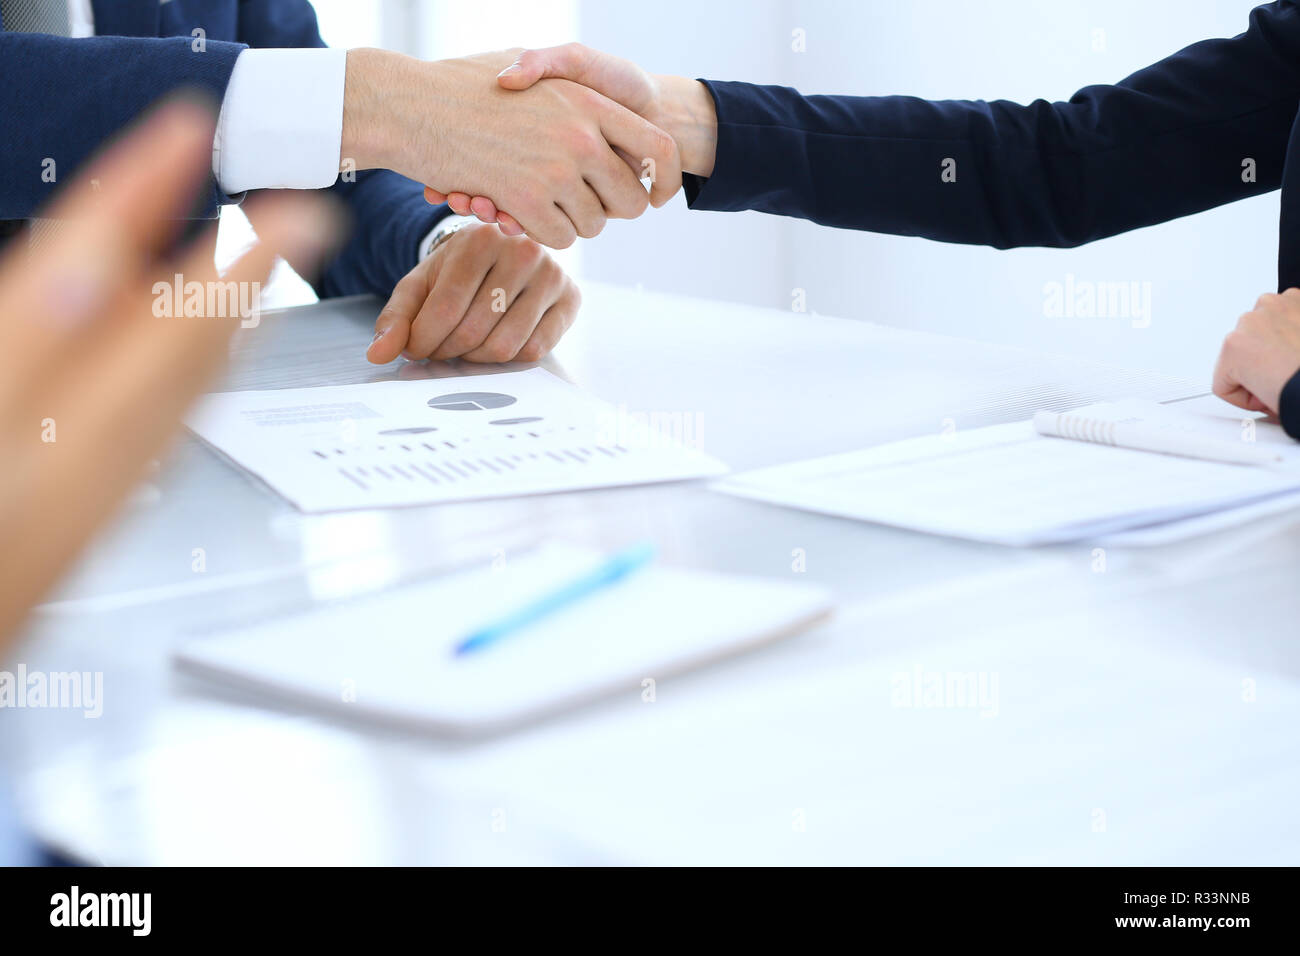 Group of business people or lawyers shaking hands finishing up a meeting , close-up. Success at negotiation and handshake concepts Stock Photo